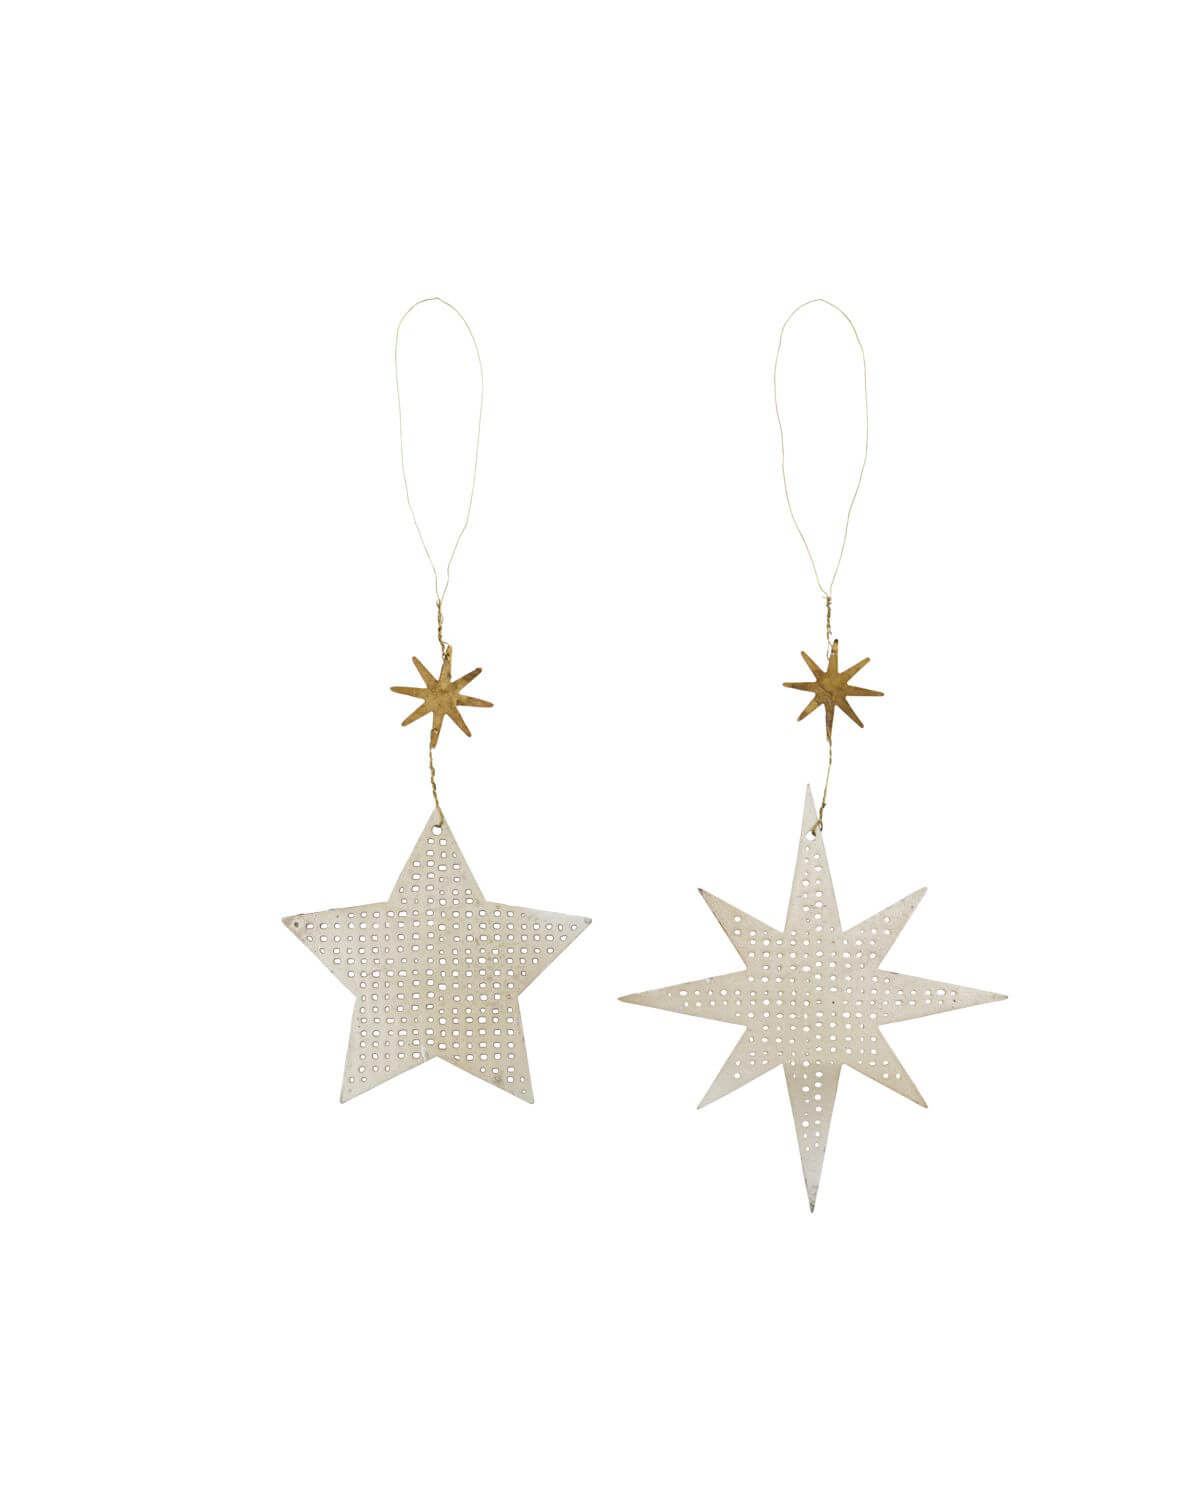 Star with Star - Ornaments | Set of 2 | Antique Silver | by House Doctor - Lifestory - House Doctor